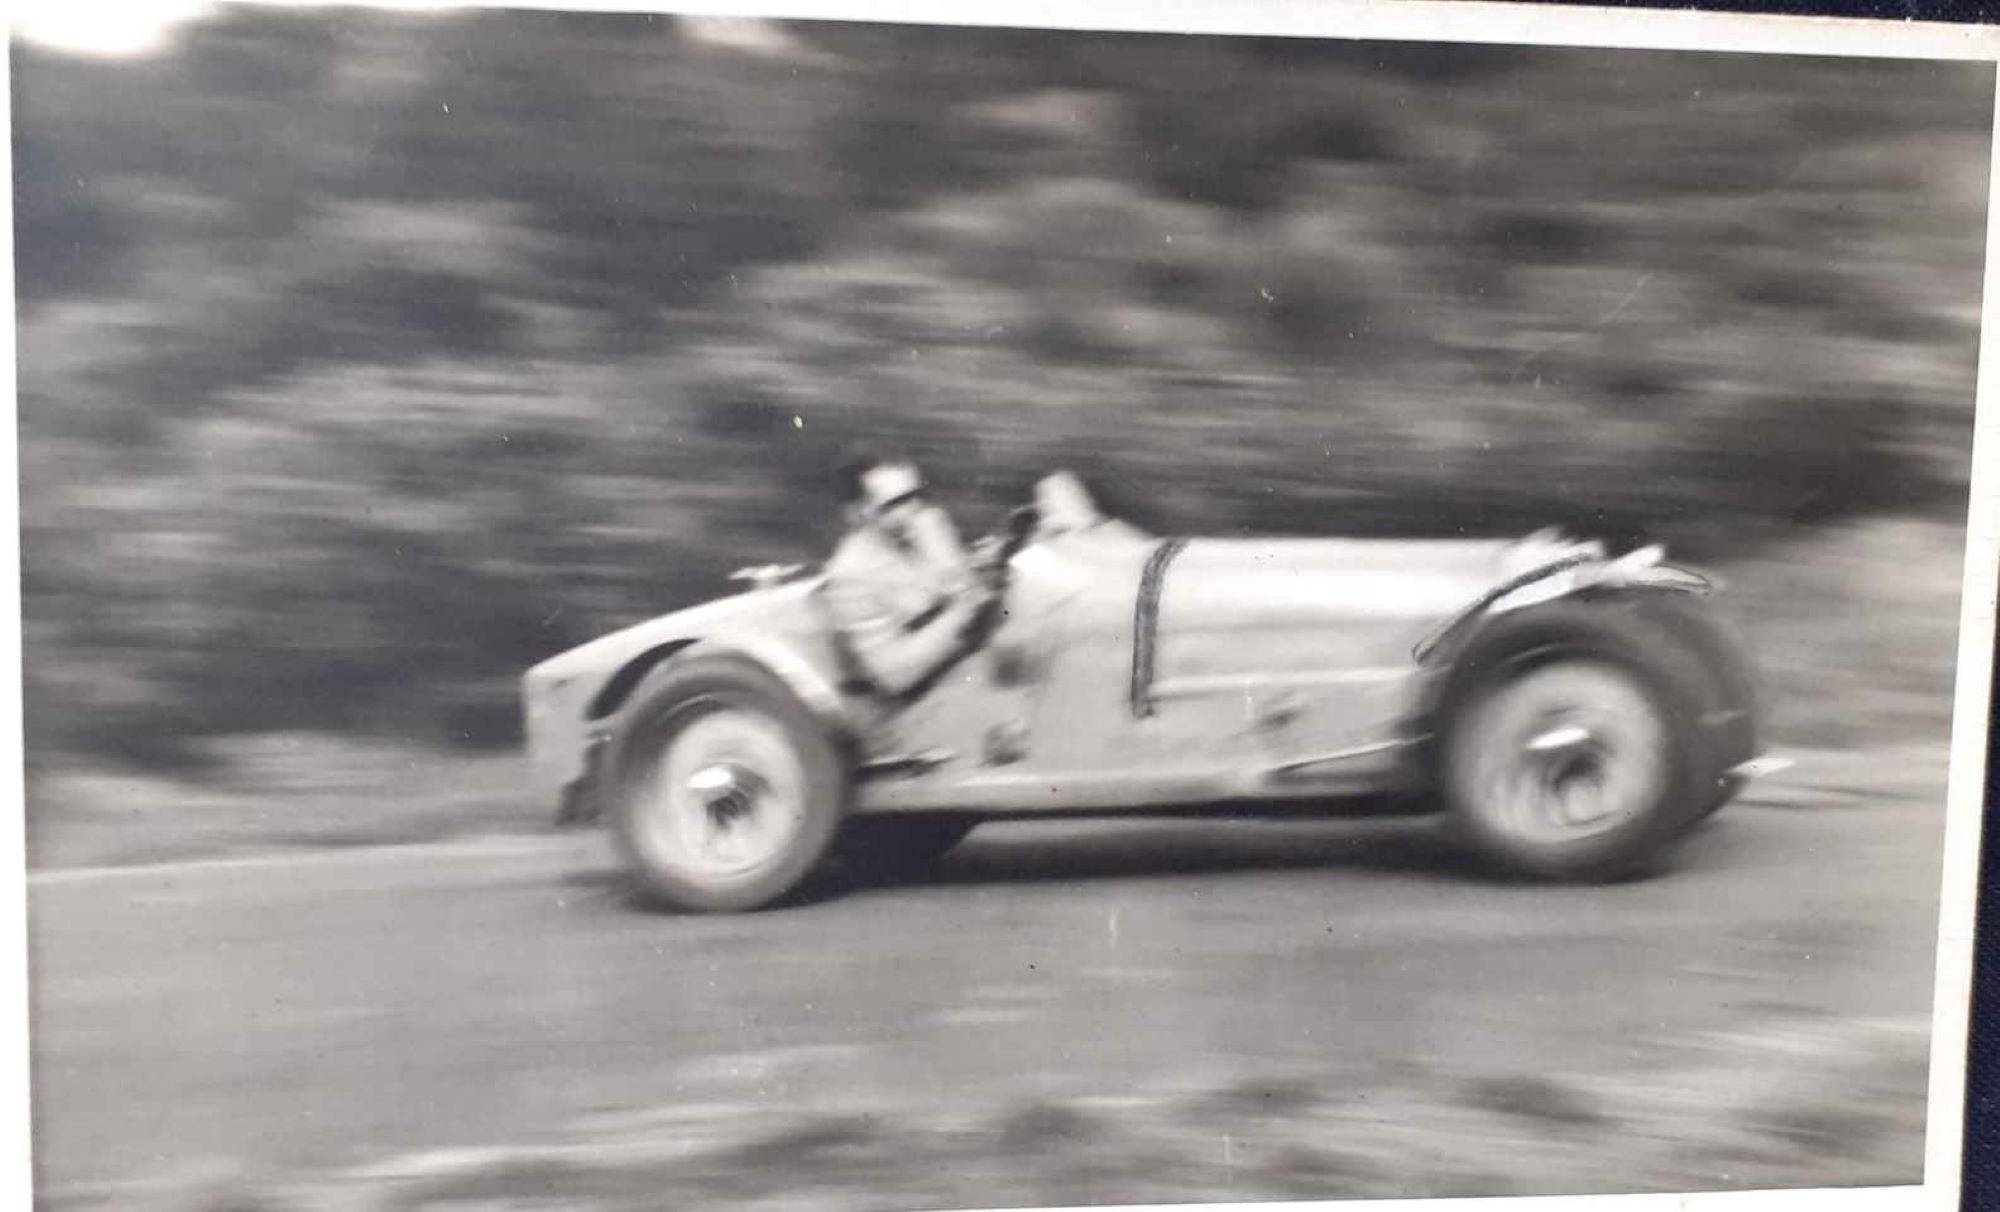 Name:  NSCC 1950 #0116 Bugatti T35 at speed - light colour 1950's - image Graeme Wells arch Anthony Wel.jpg
Views: 209
Size:  158.1 KB